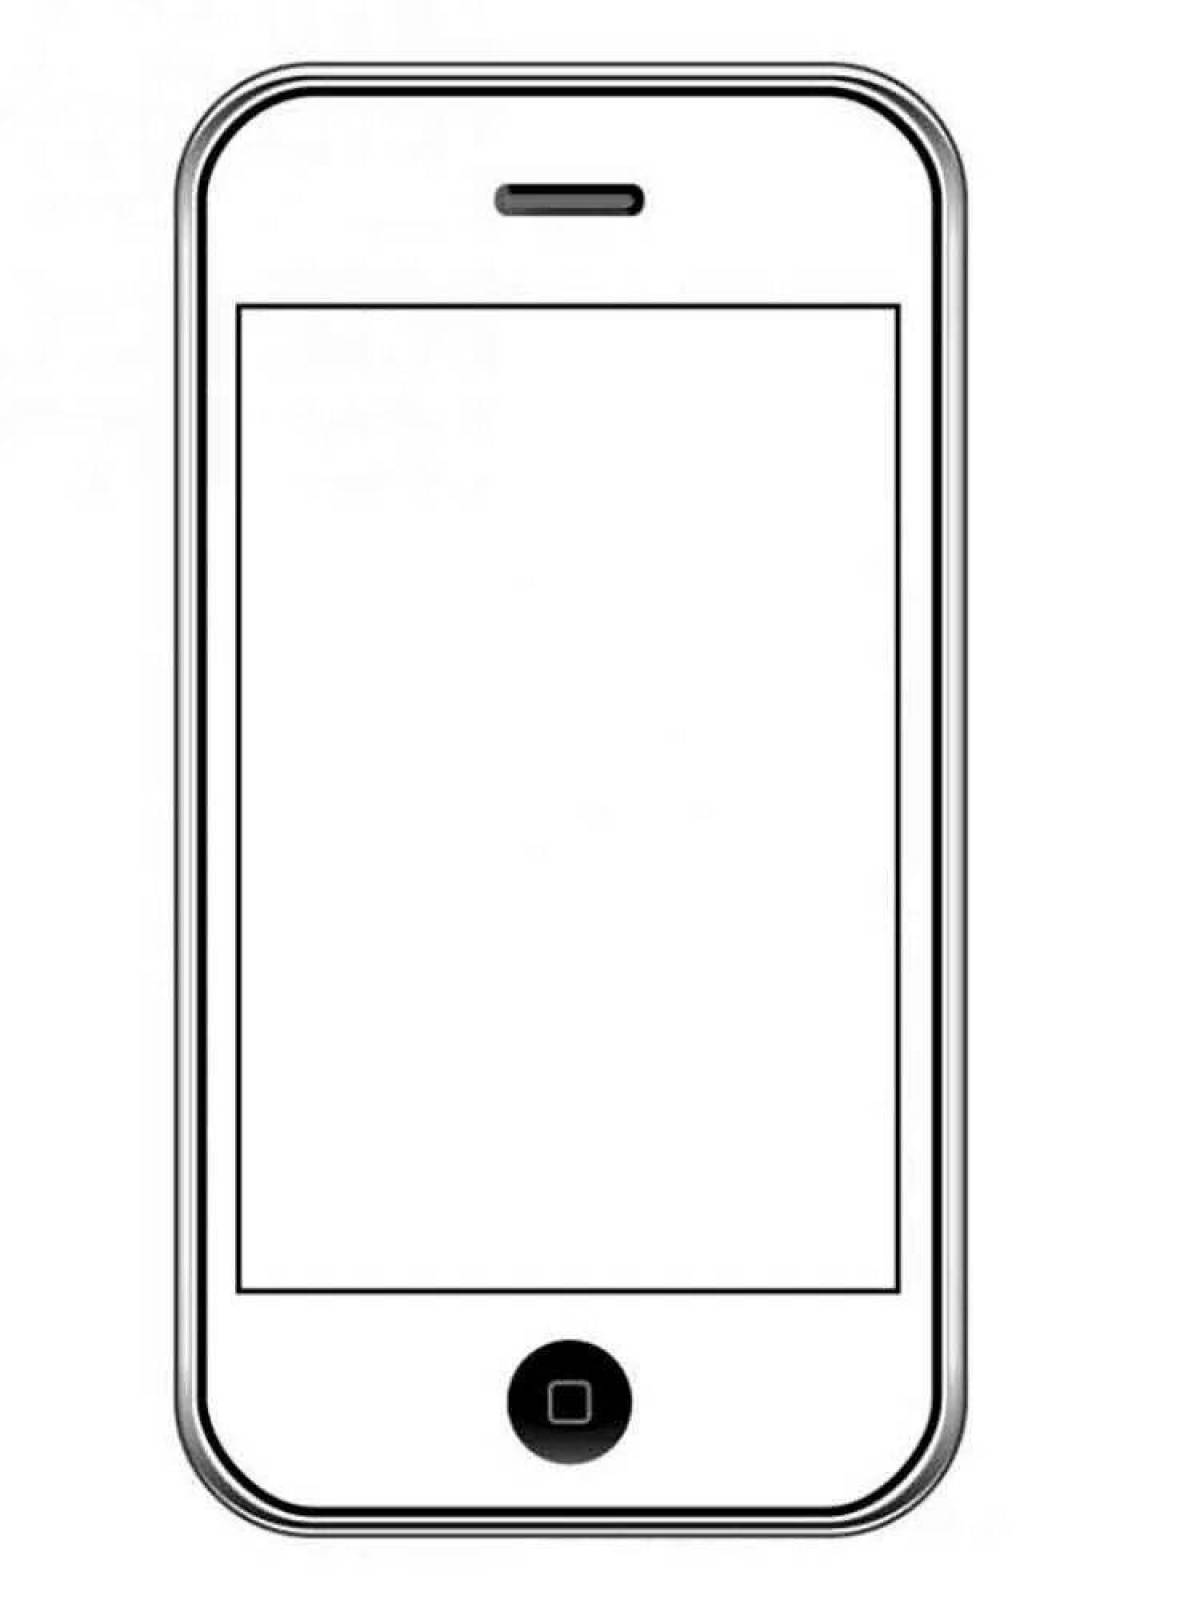 An entertaining mobile phone coloring book for kids